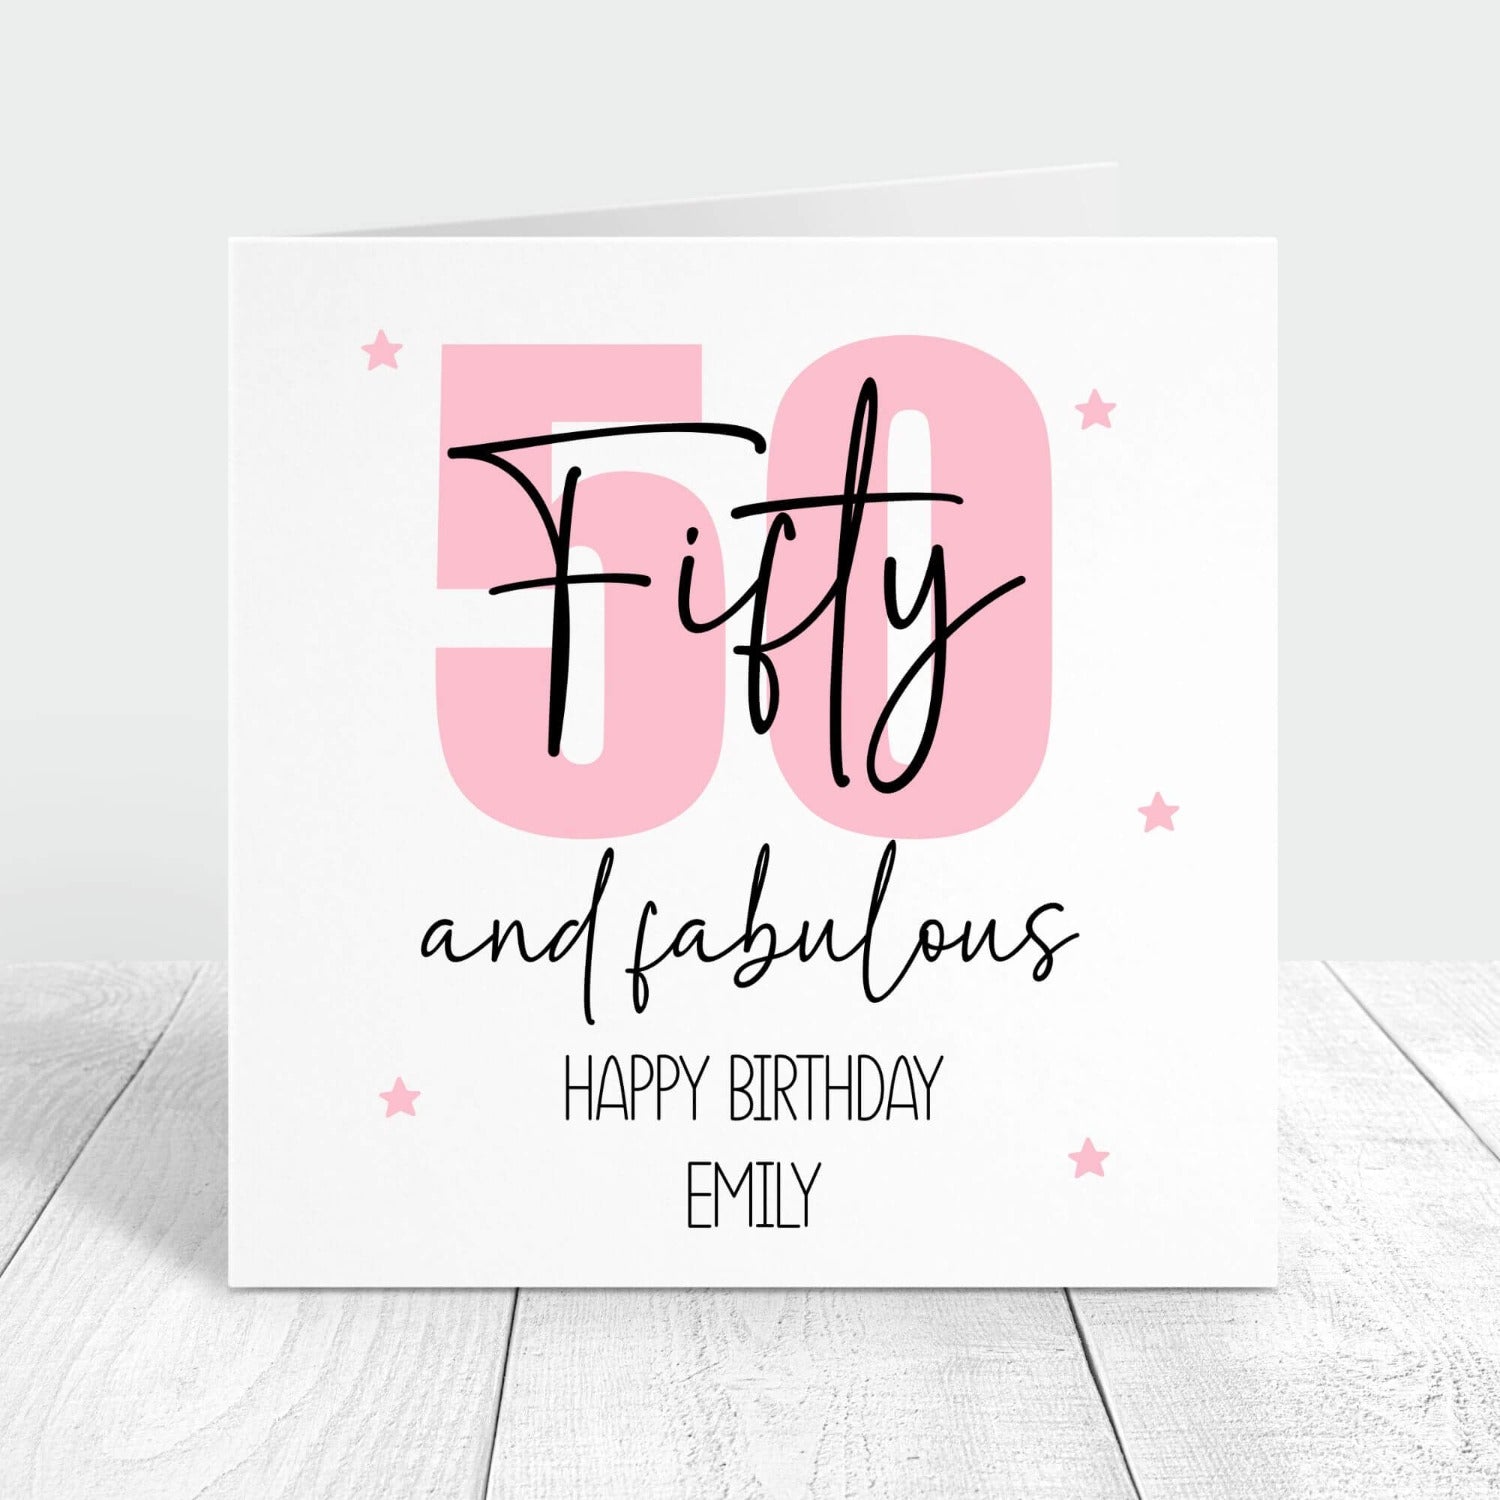 50 and fabulous personalised birthday card